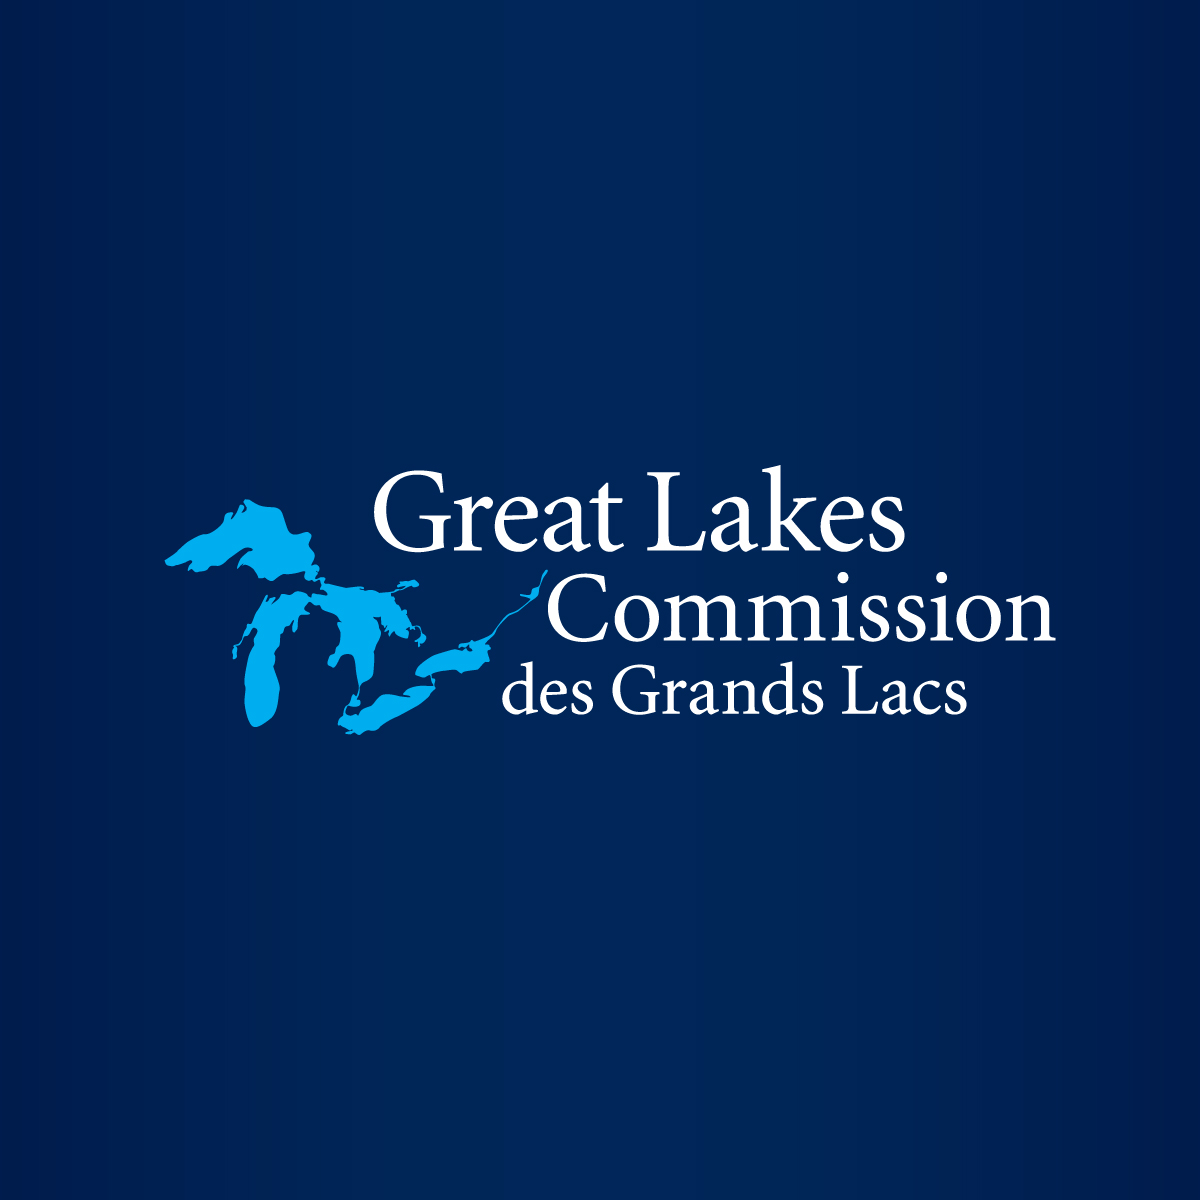 Great Lakes website launches